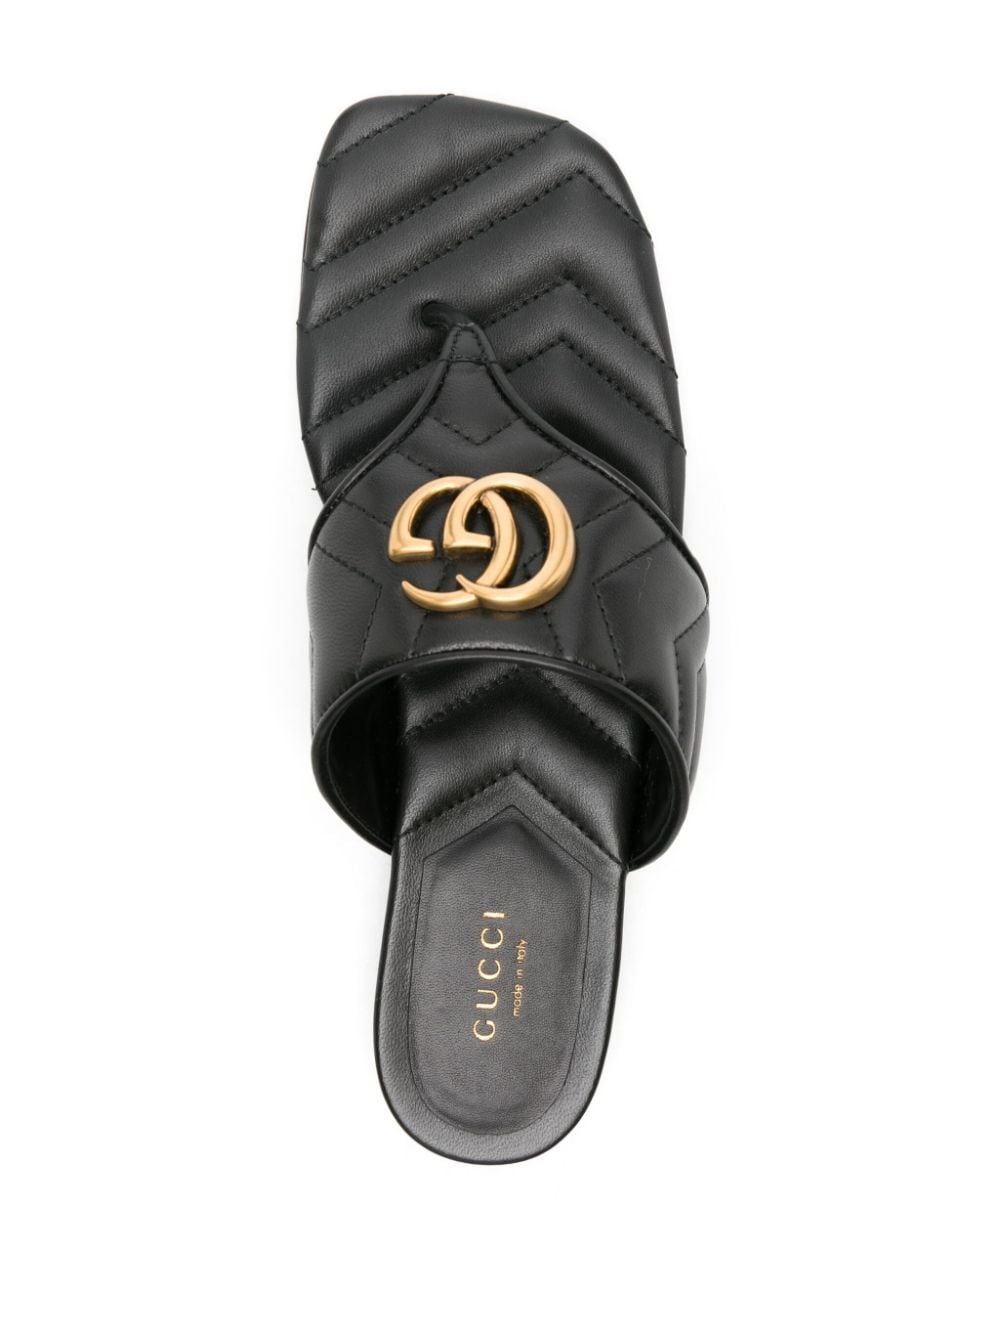 Double G leather sandals - 4